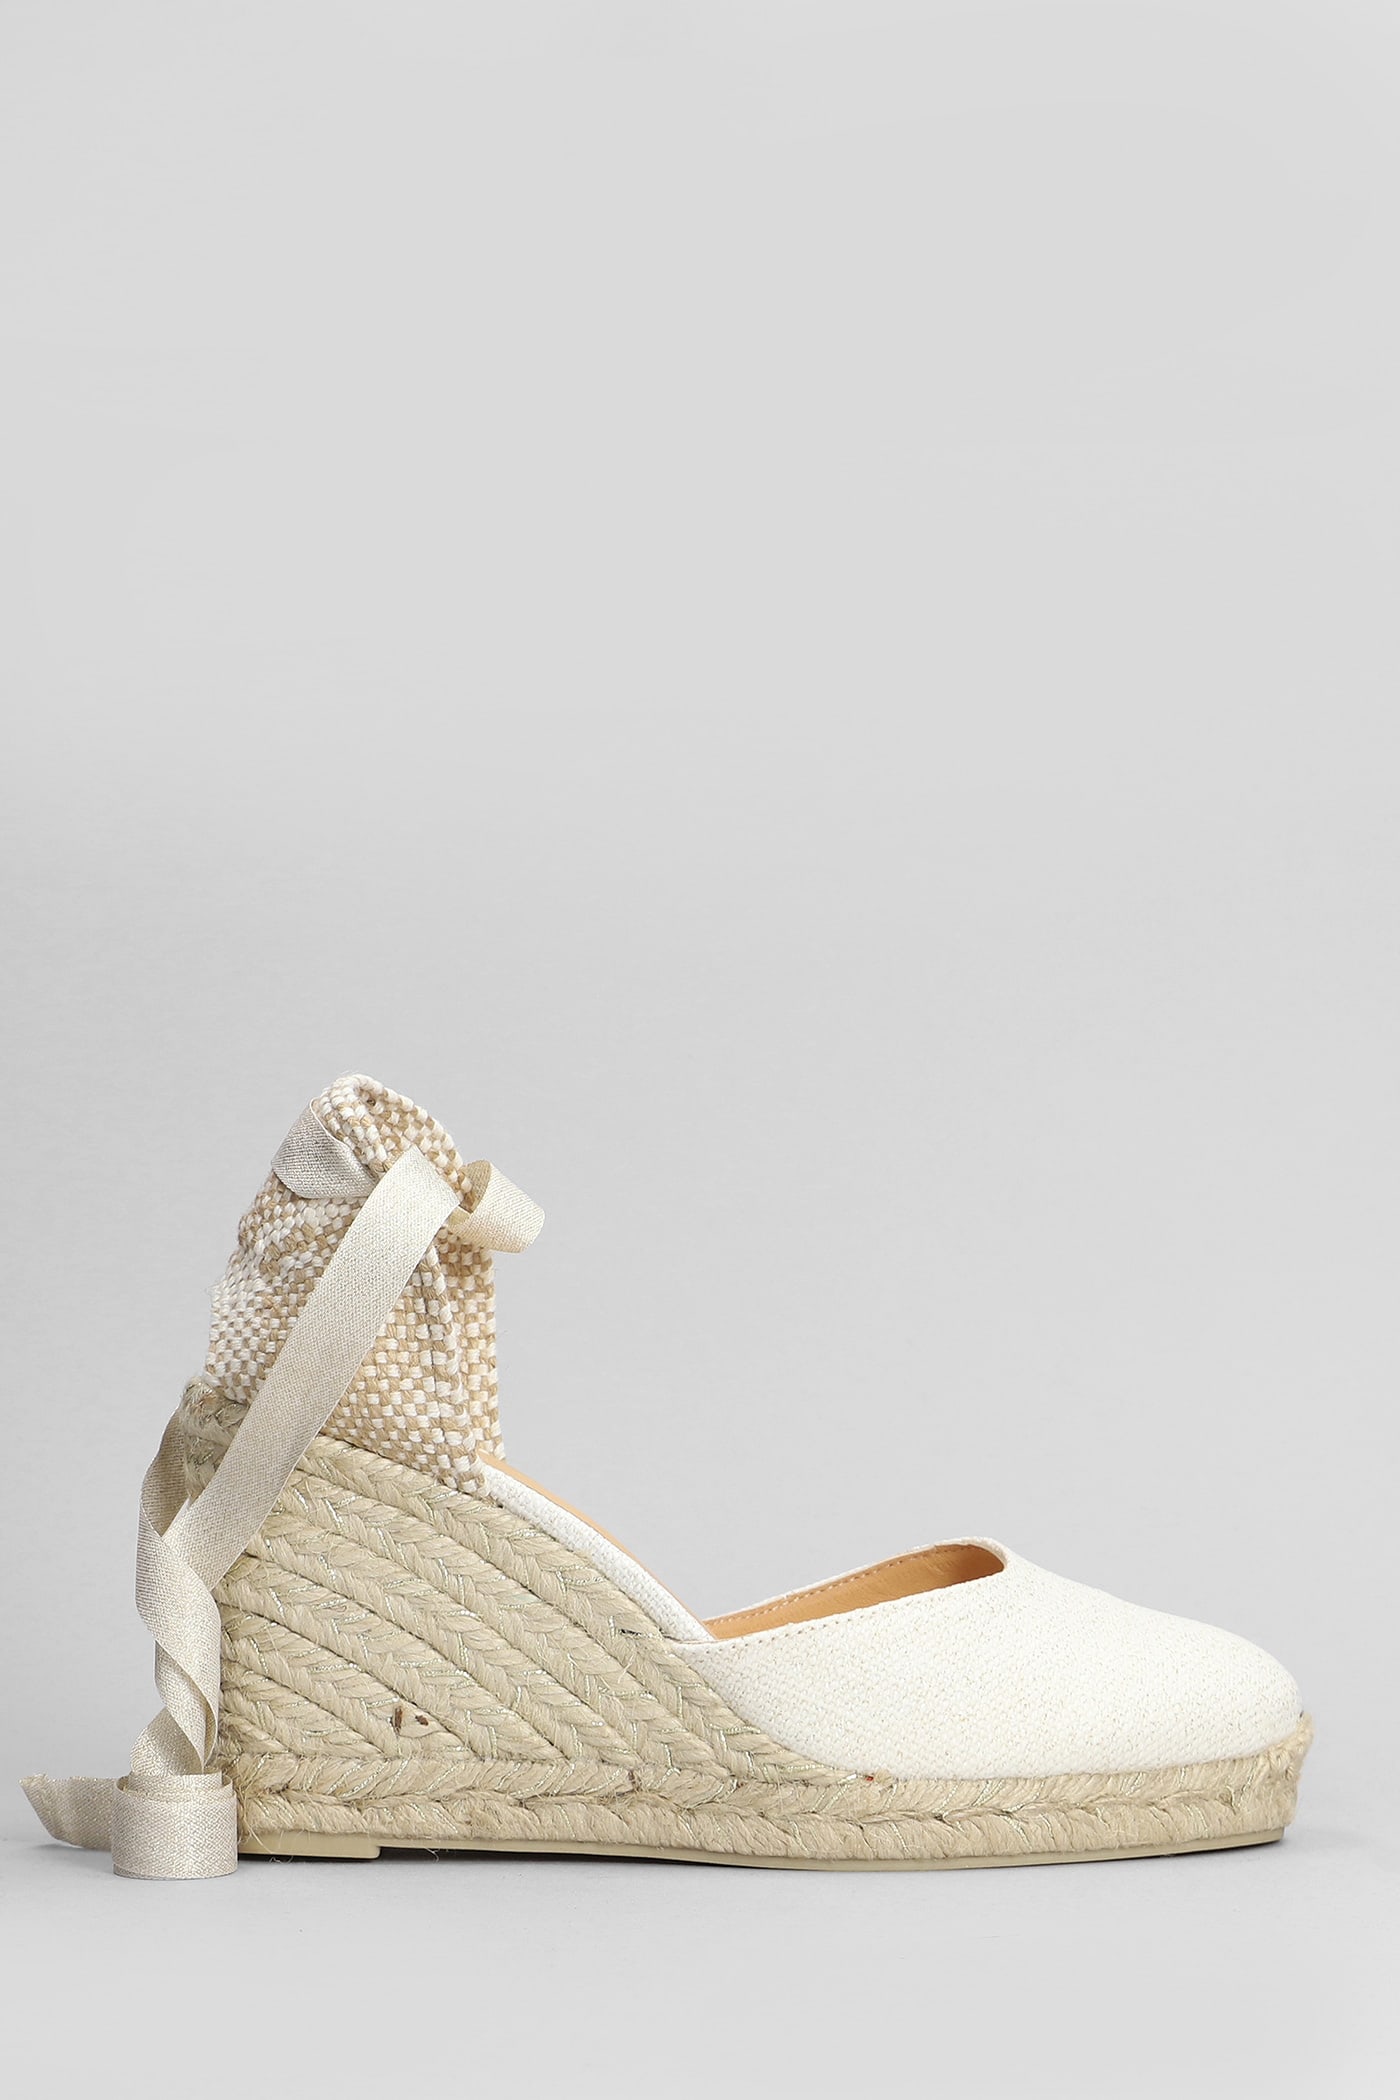 Castañer Carina-8-032 Wedges In White Canvas